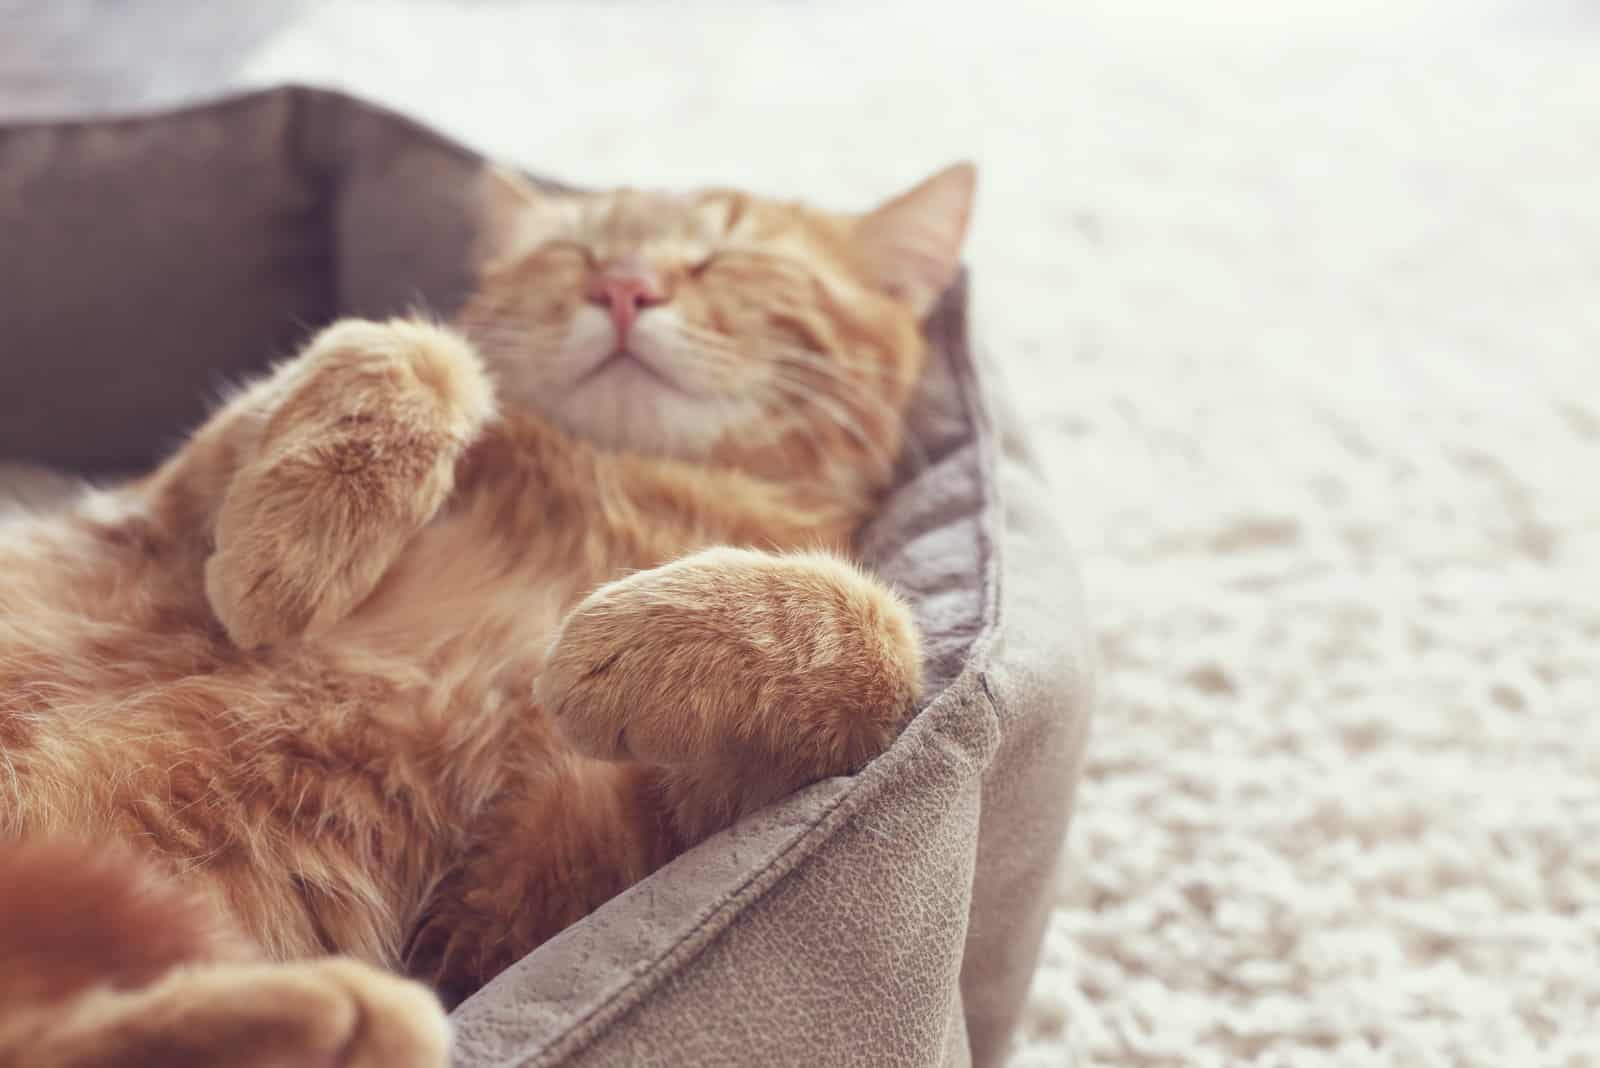 A ginger cat sleeps in his soft cozy bed on a floor carpet